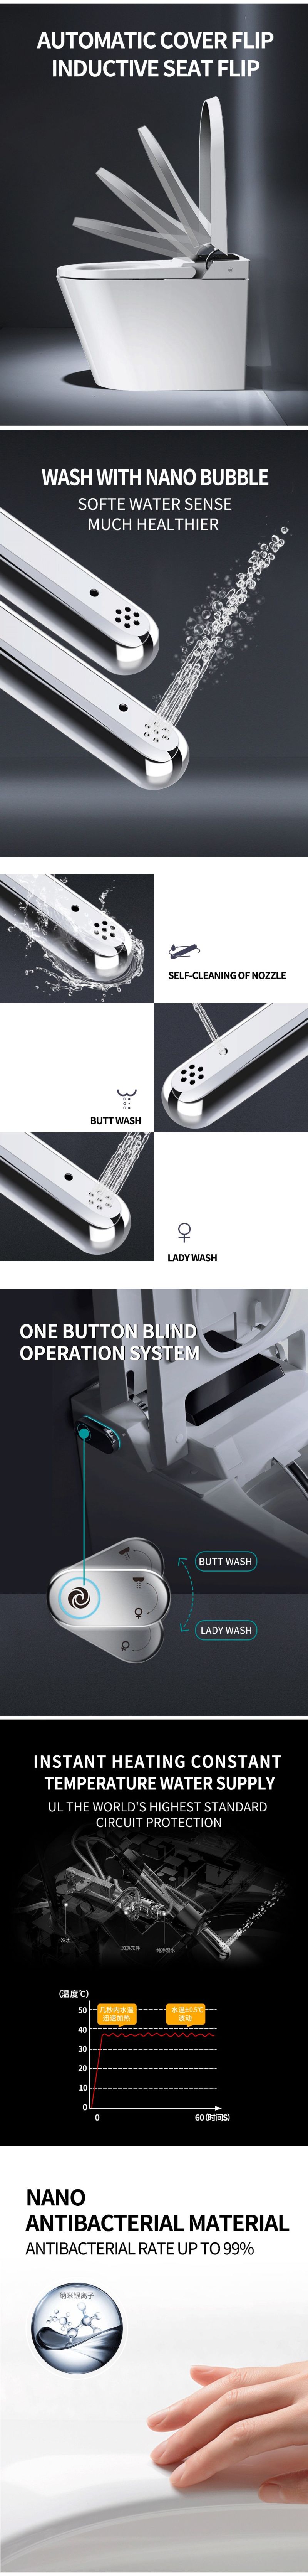 Sanitary Instant Heating Automatic Inductive Intelligent Toilet Factory